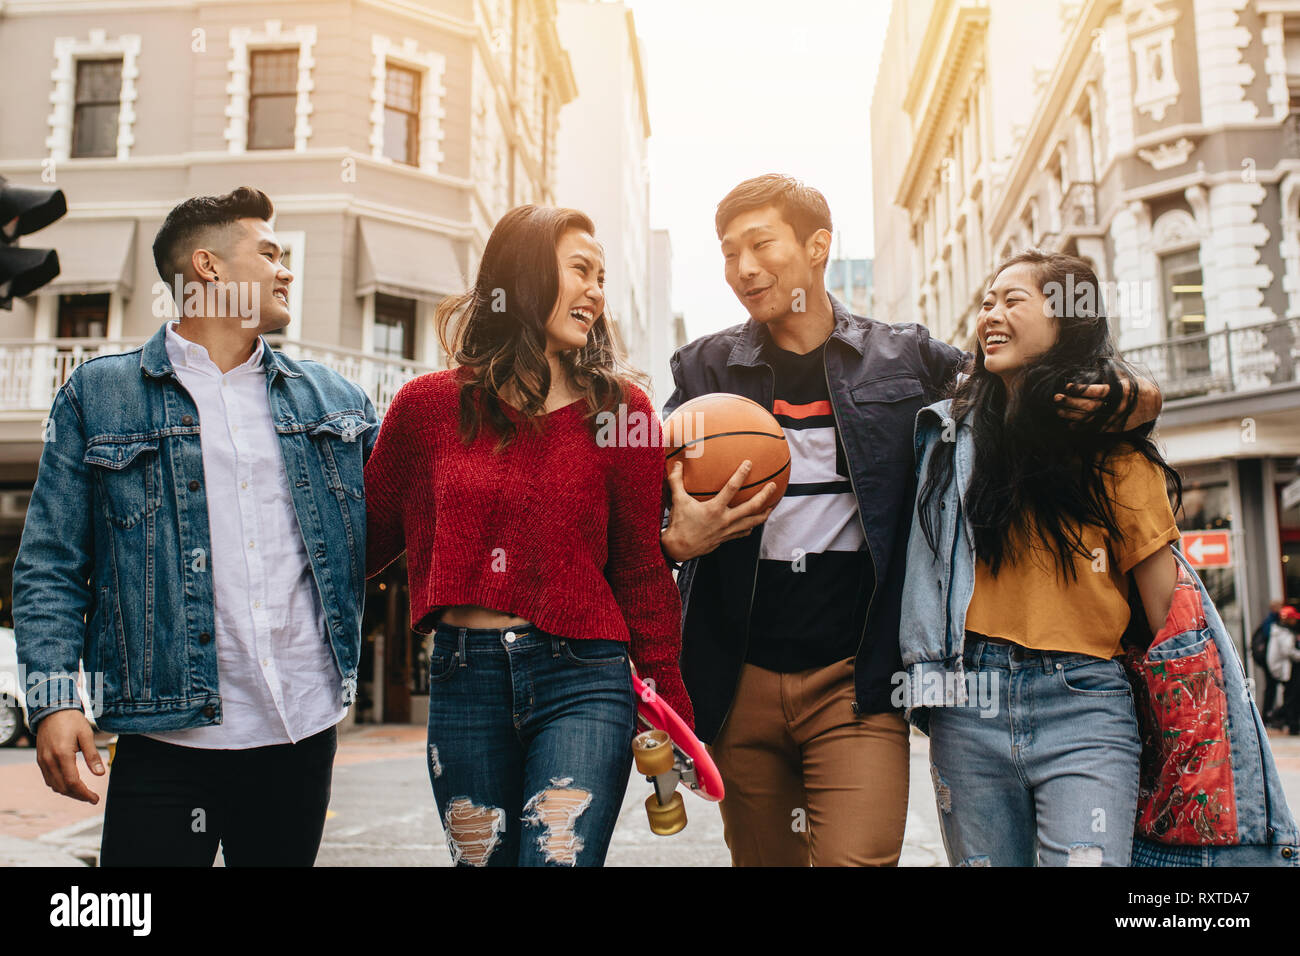 Group of men and women walking outdoors with skateboard and basketball. Two couples walking on city street. Stock Photo